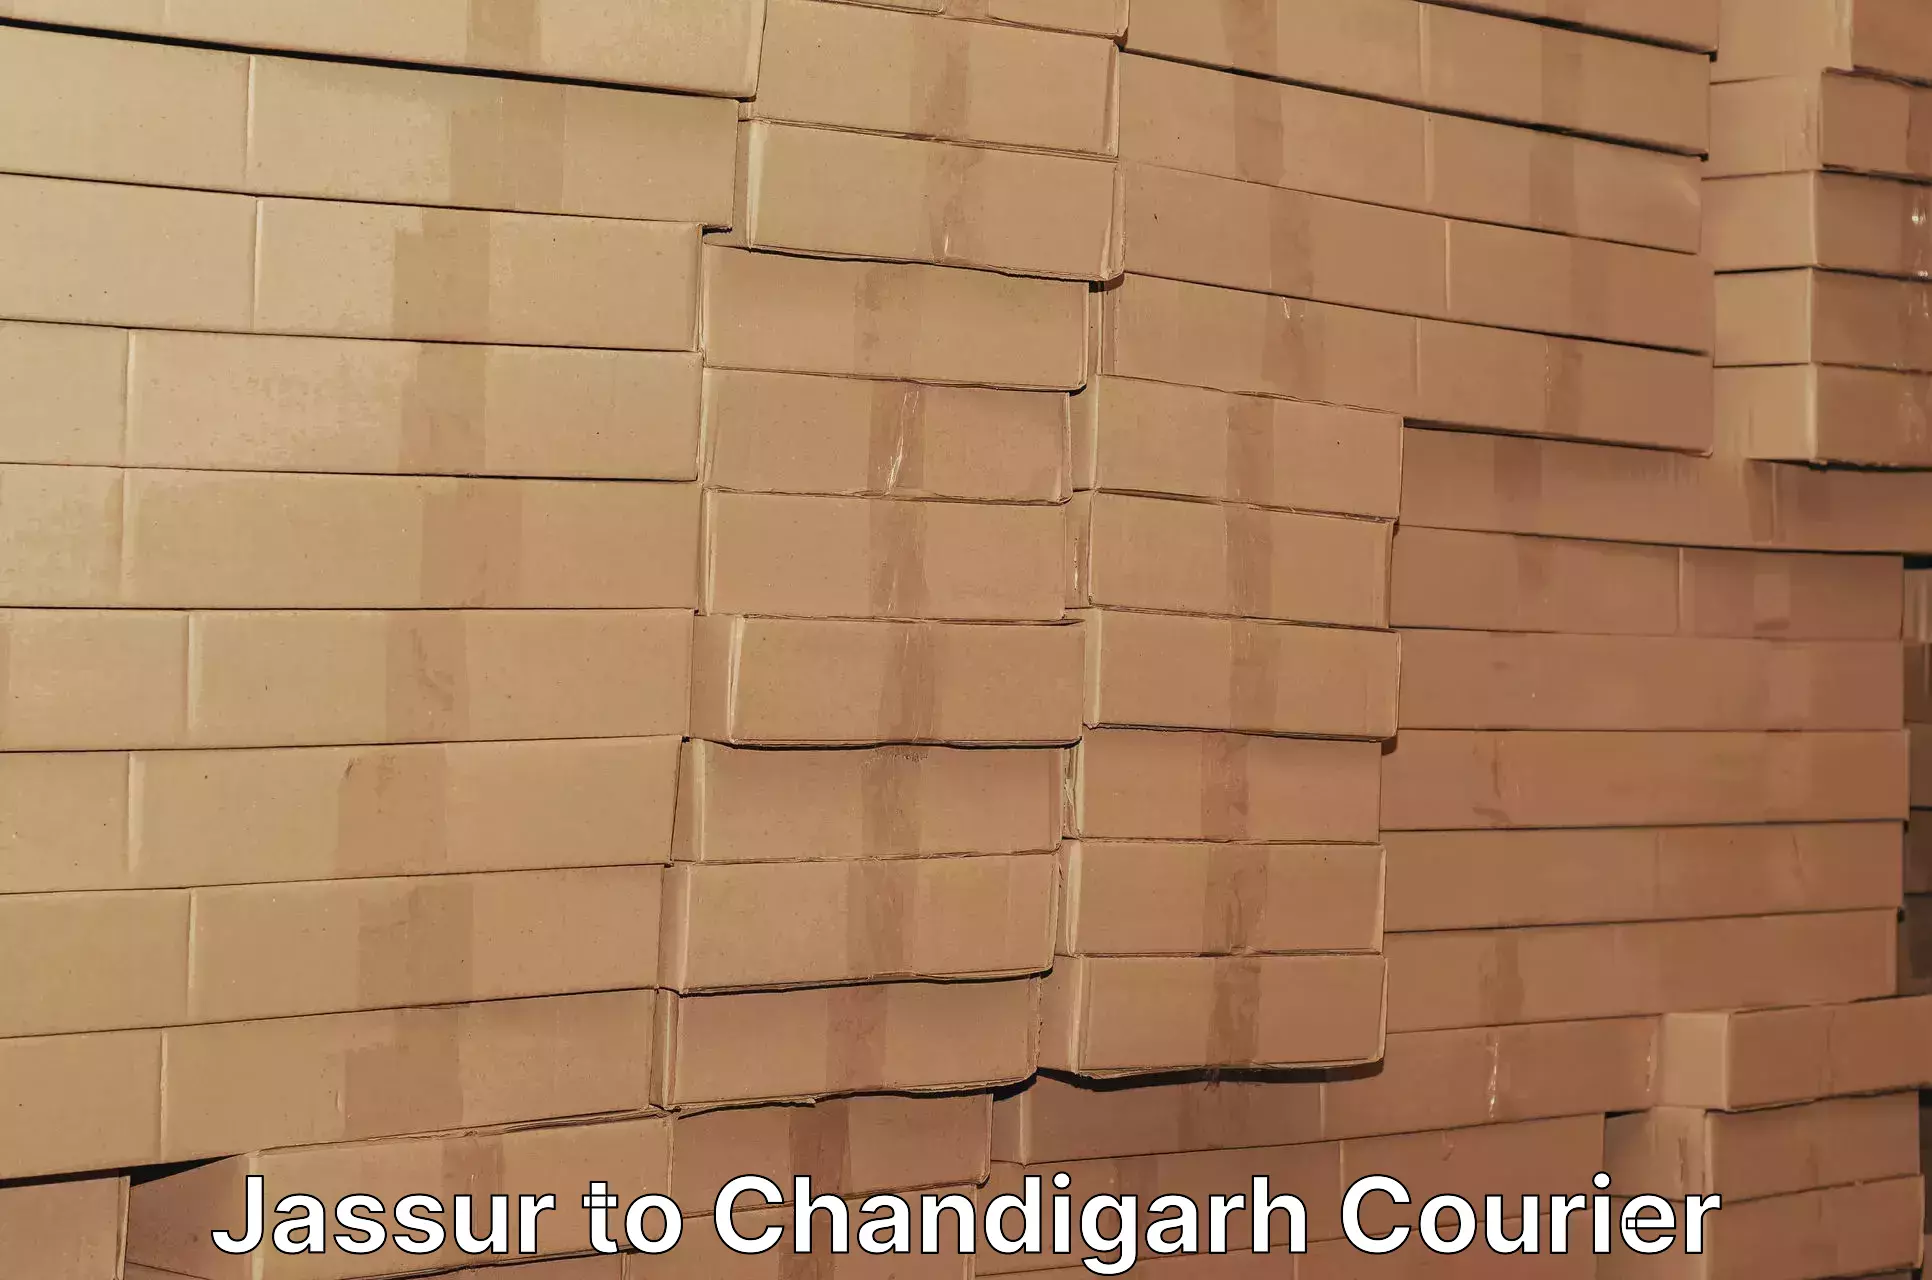 Package delivery network Jassur to Chandigarh